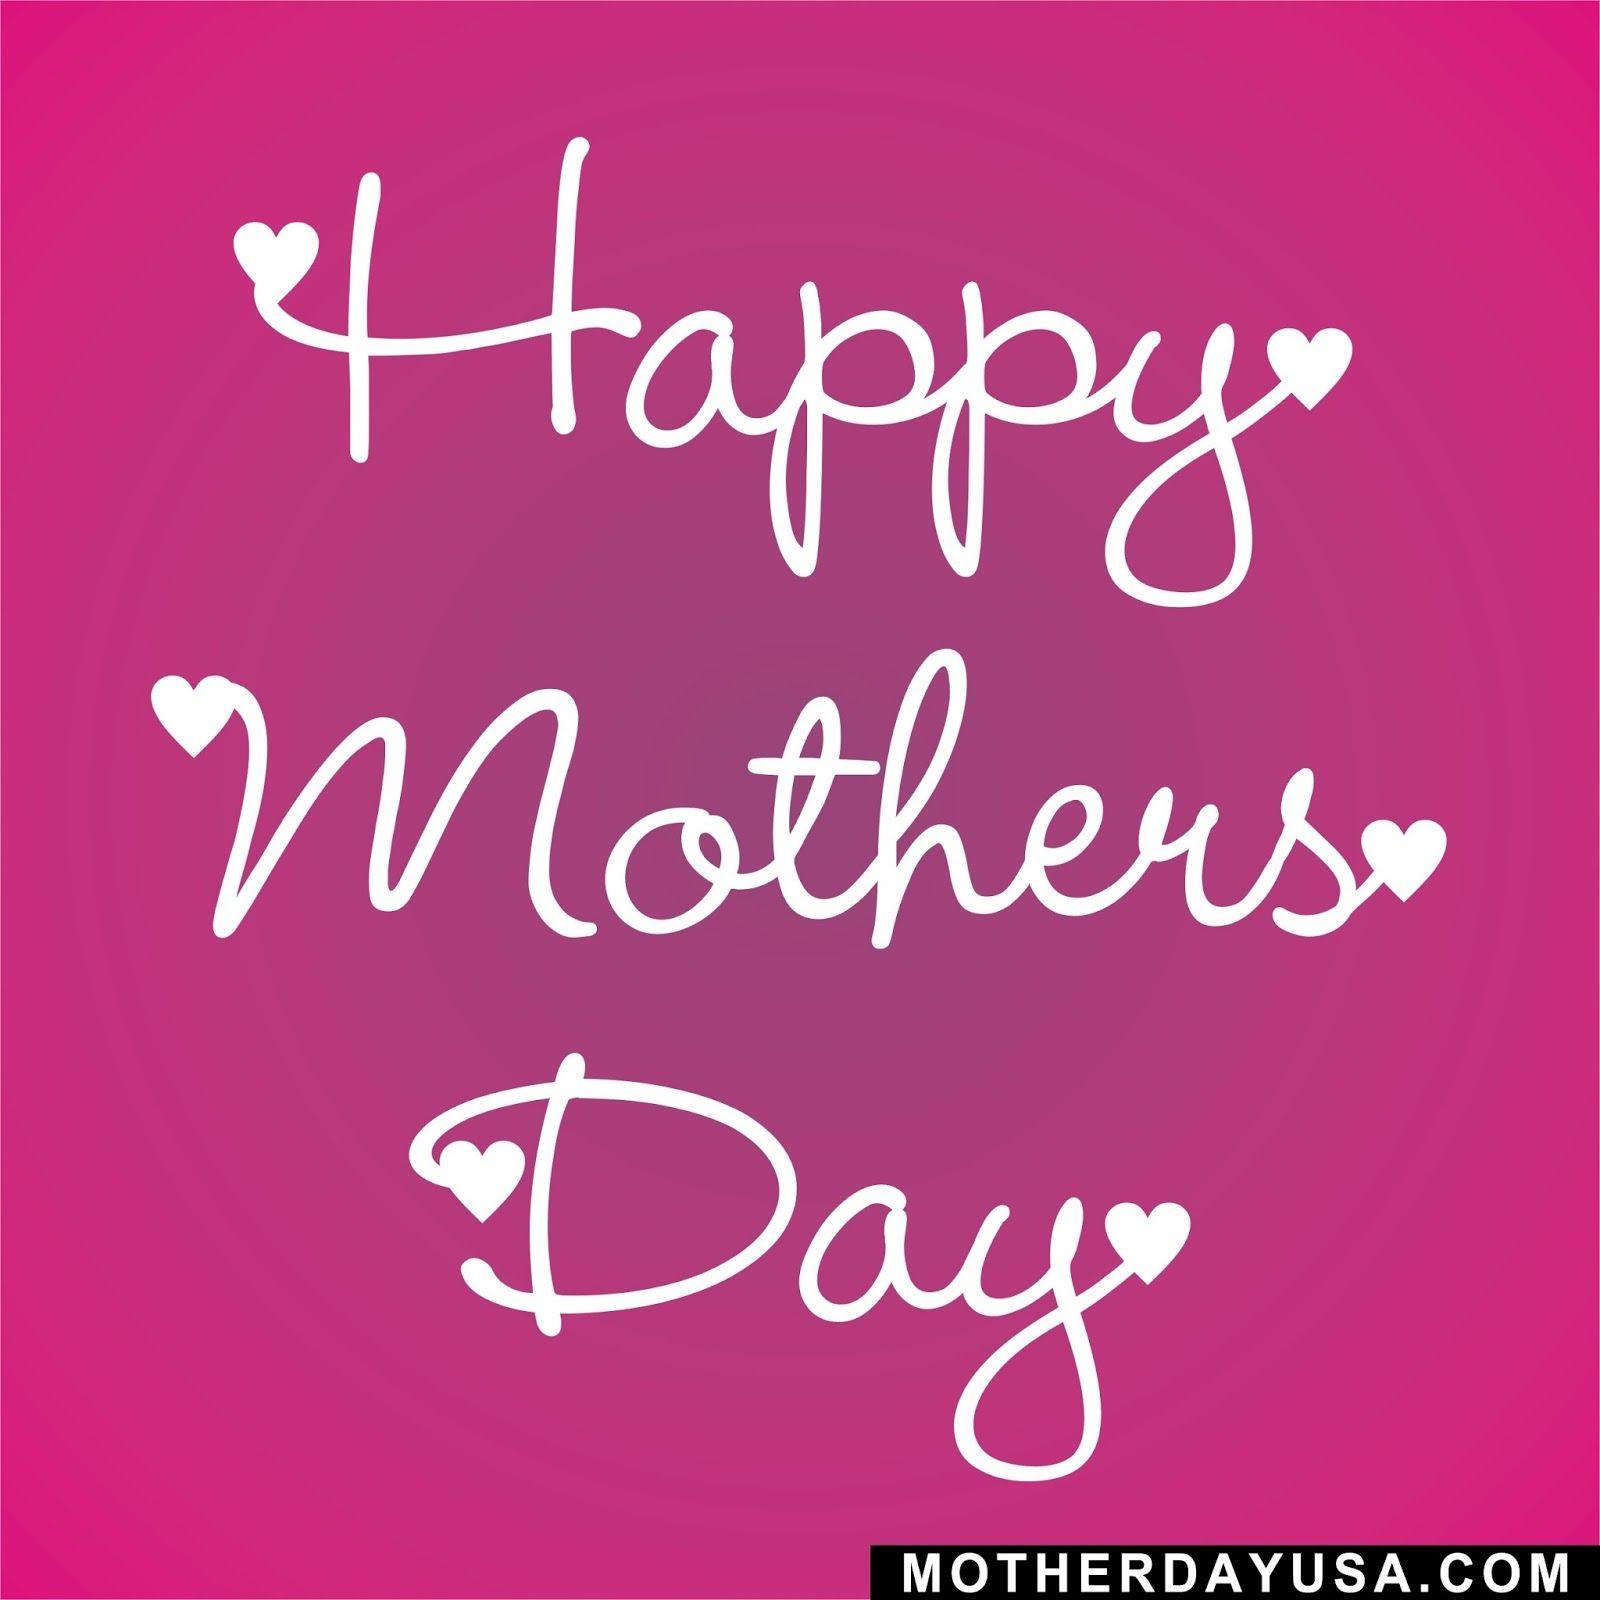 Happy Mothers Day 2018 Quotes, Image, Poetry, Poems, Gifts